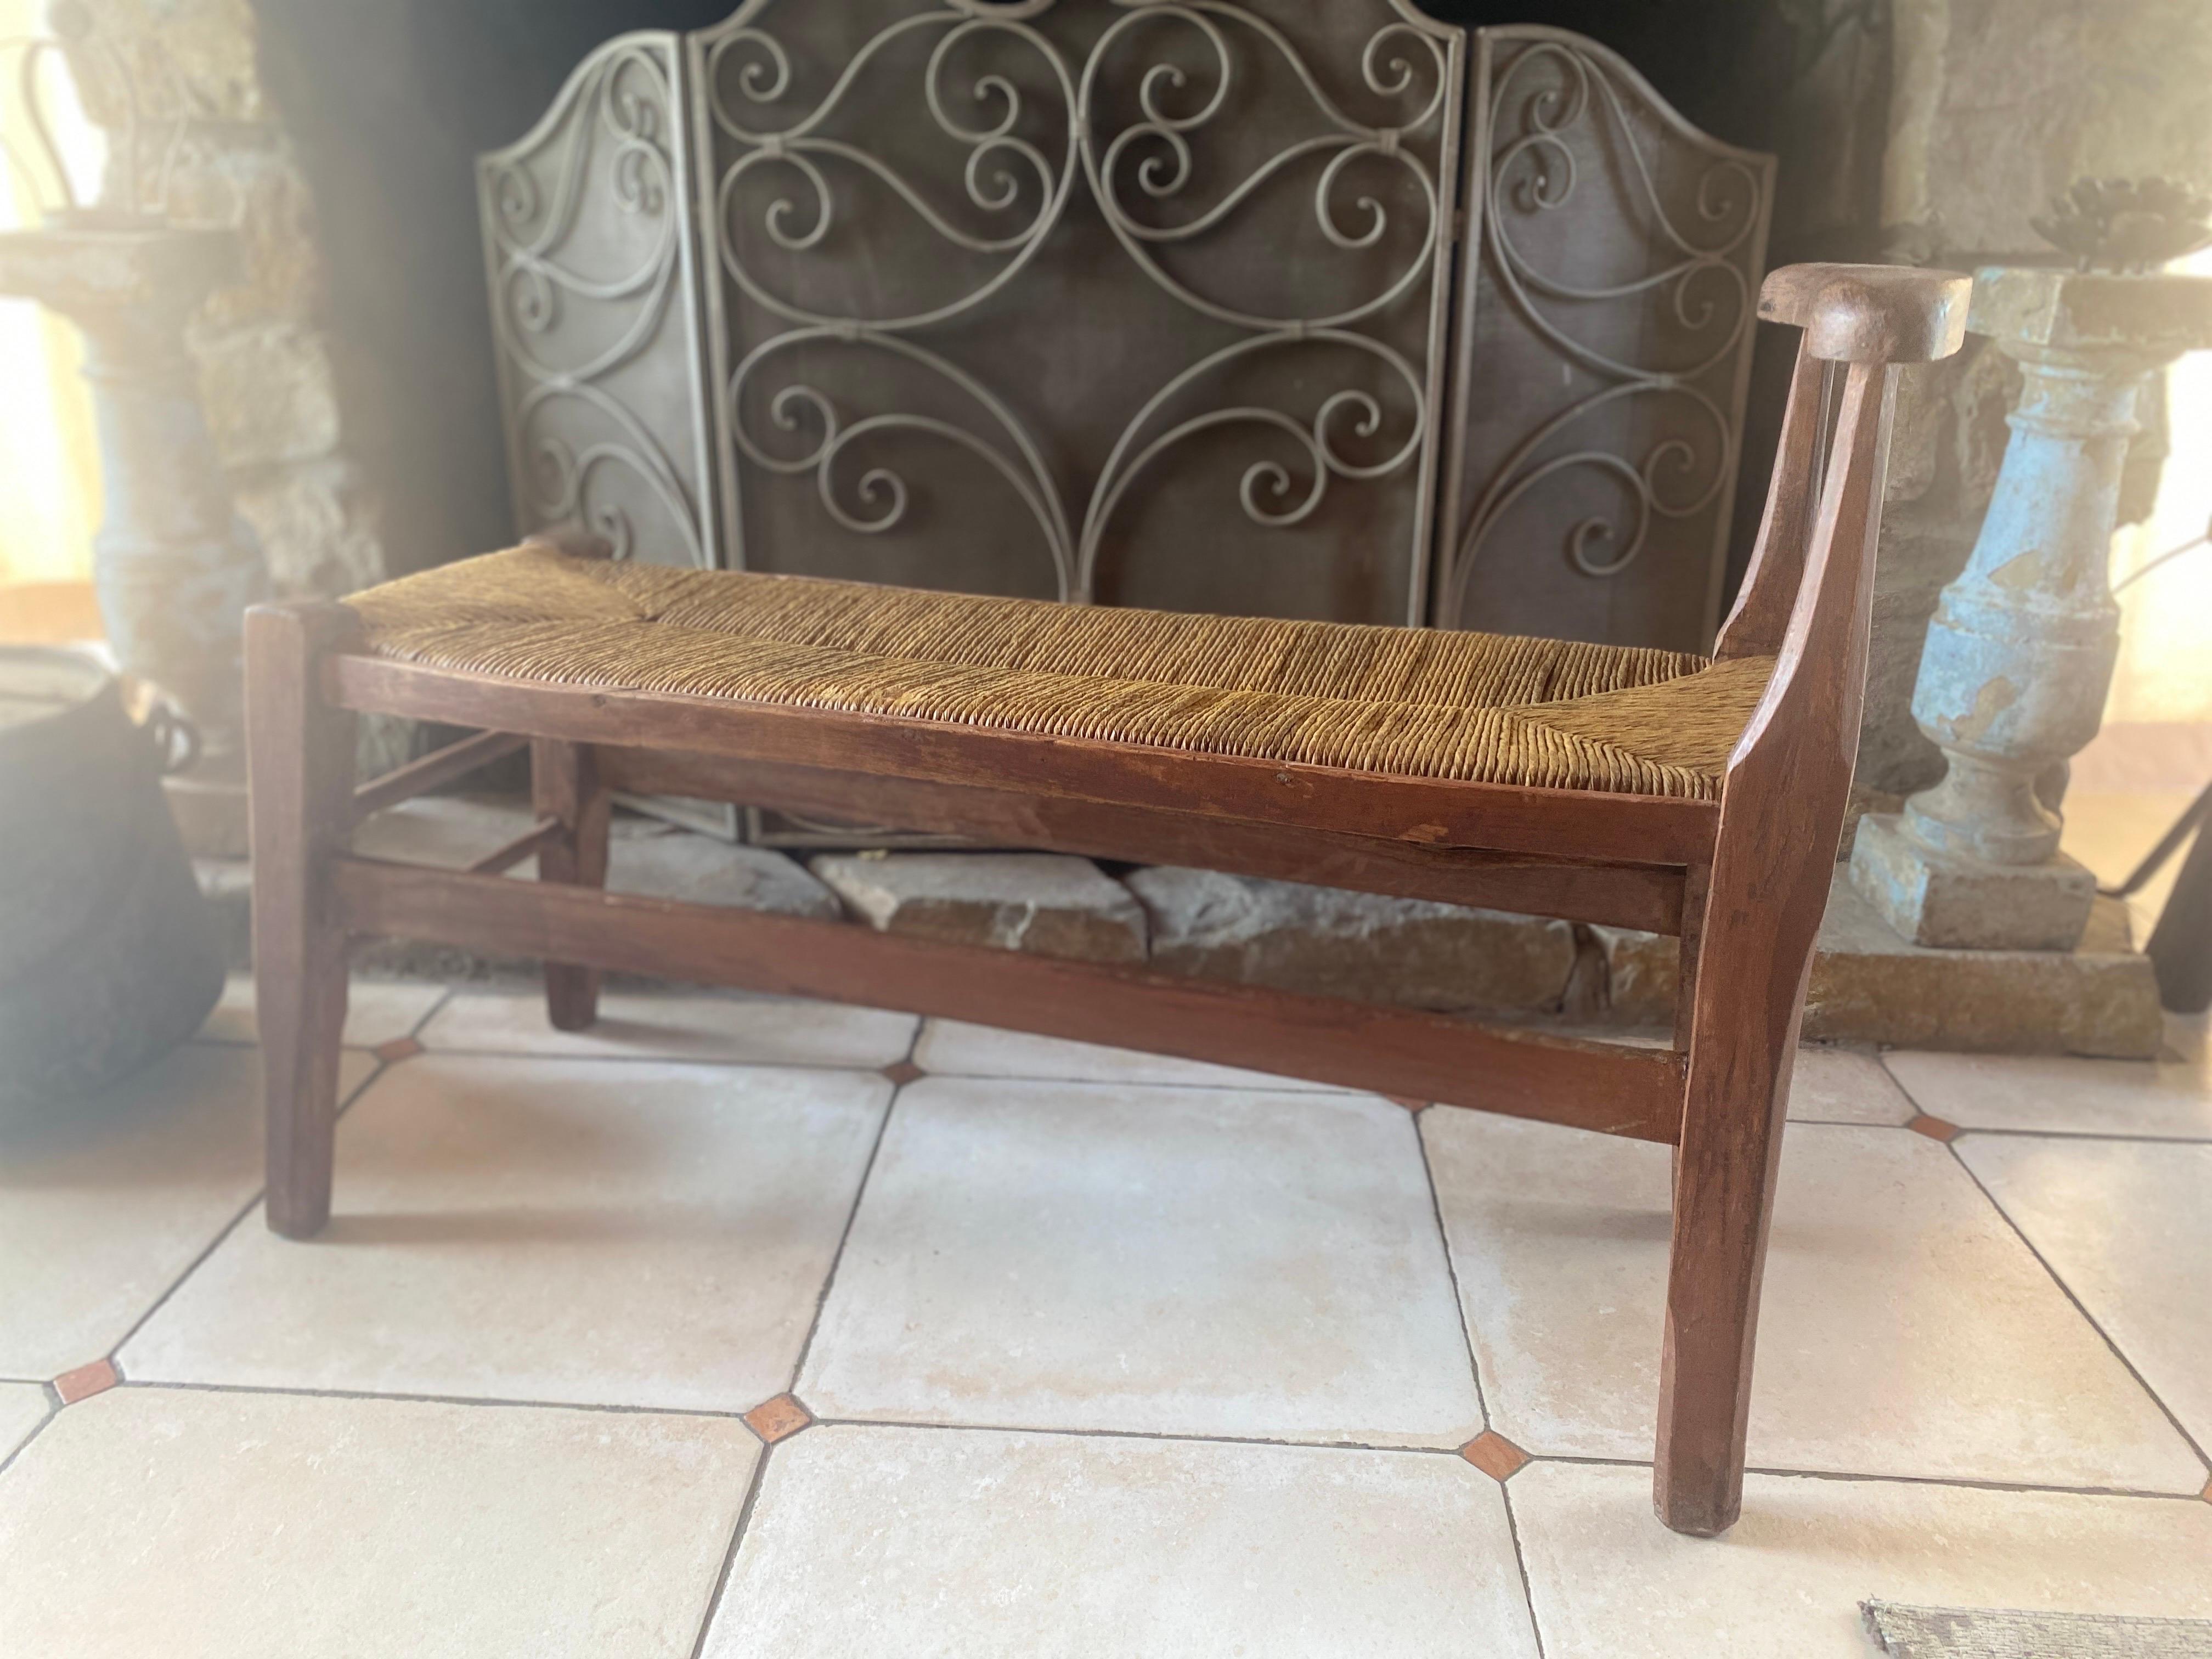 Cantou ( fireplace) bench dating 18th century south France original patina  For Sale 3